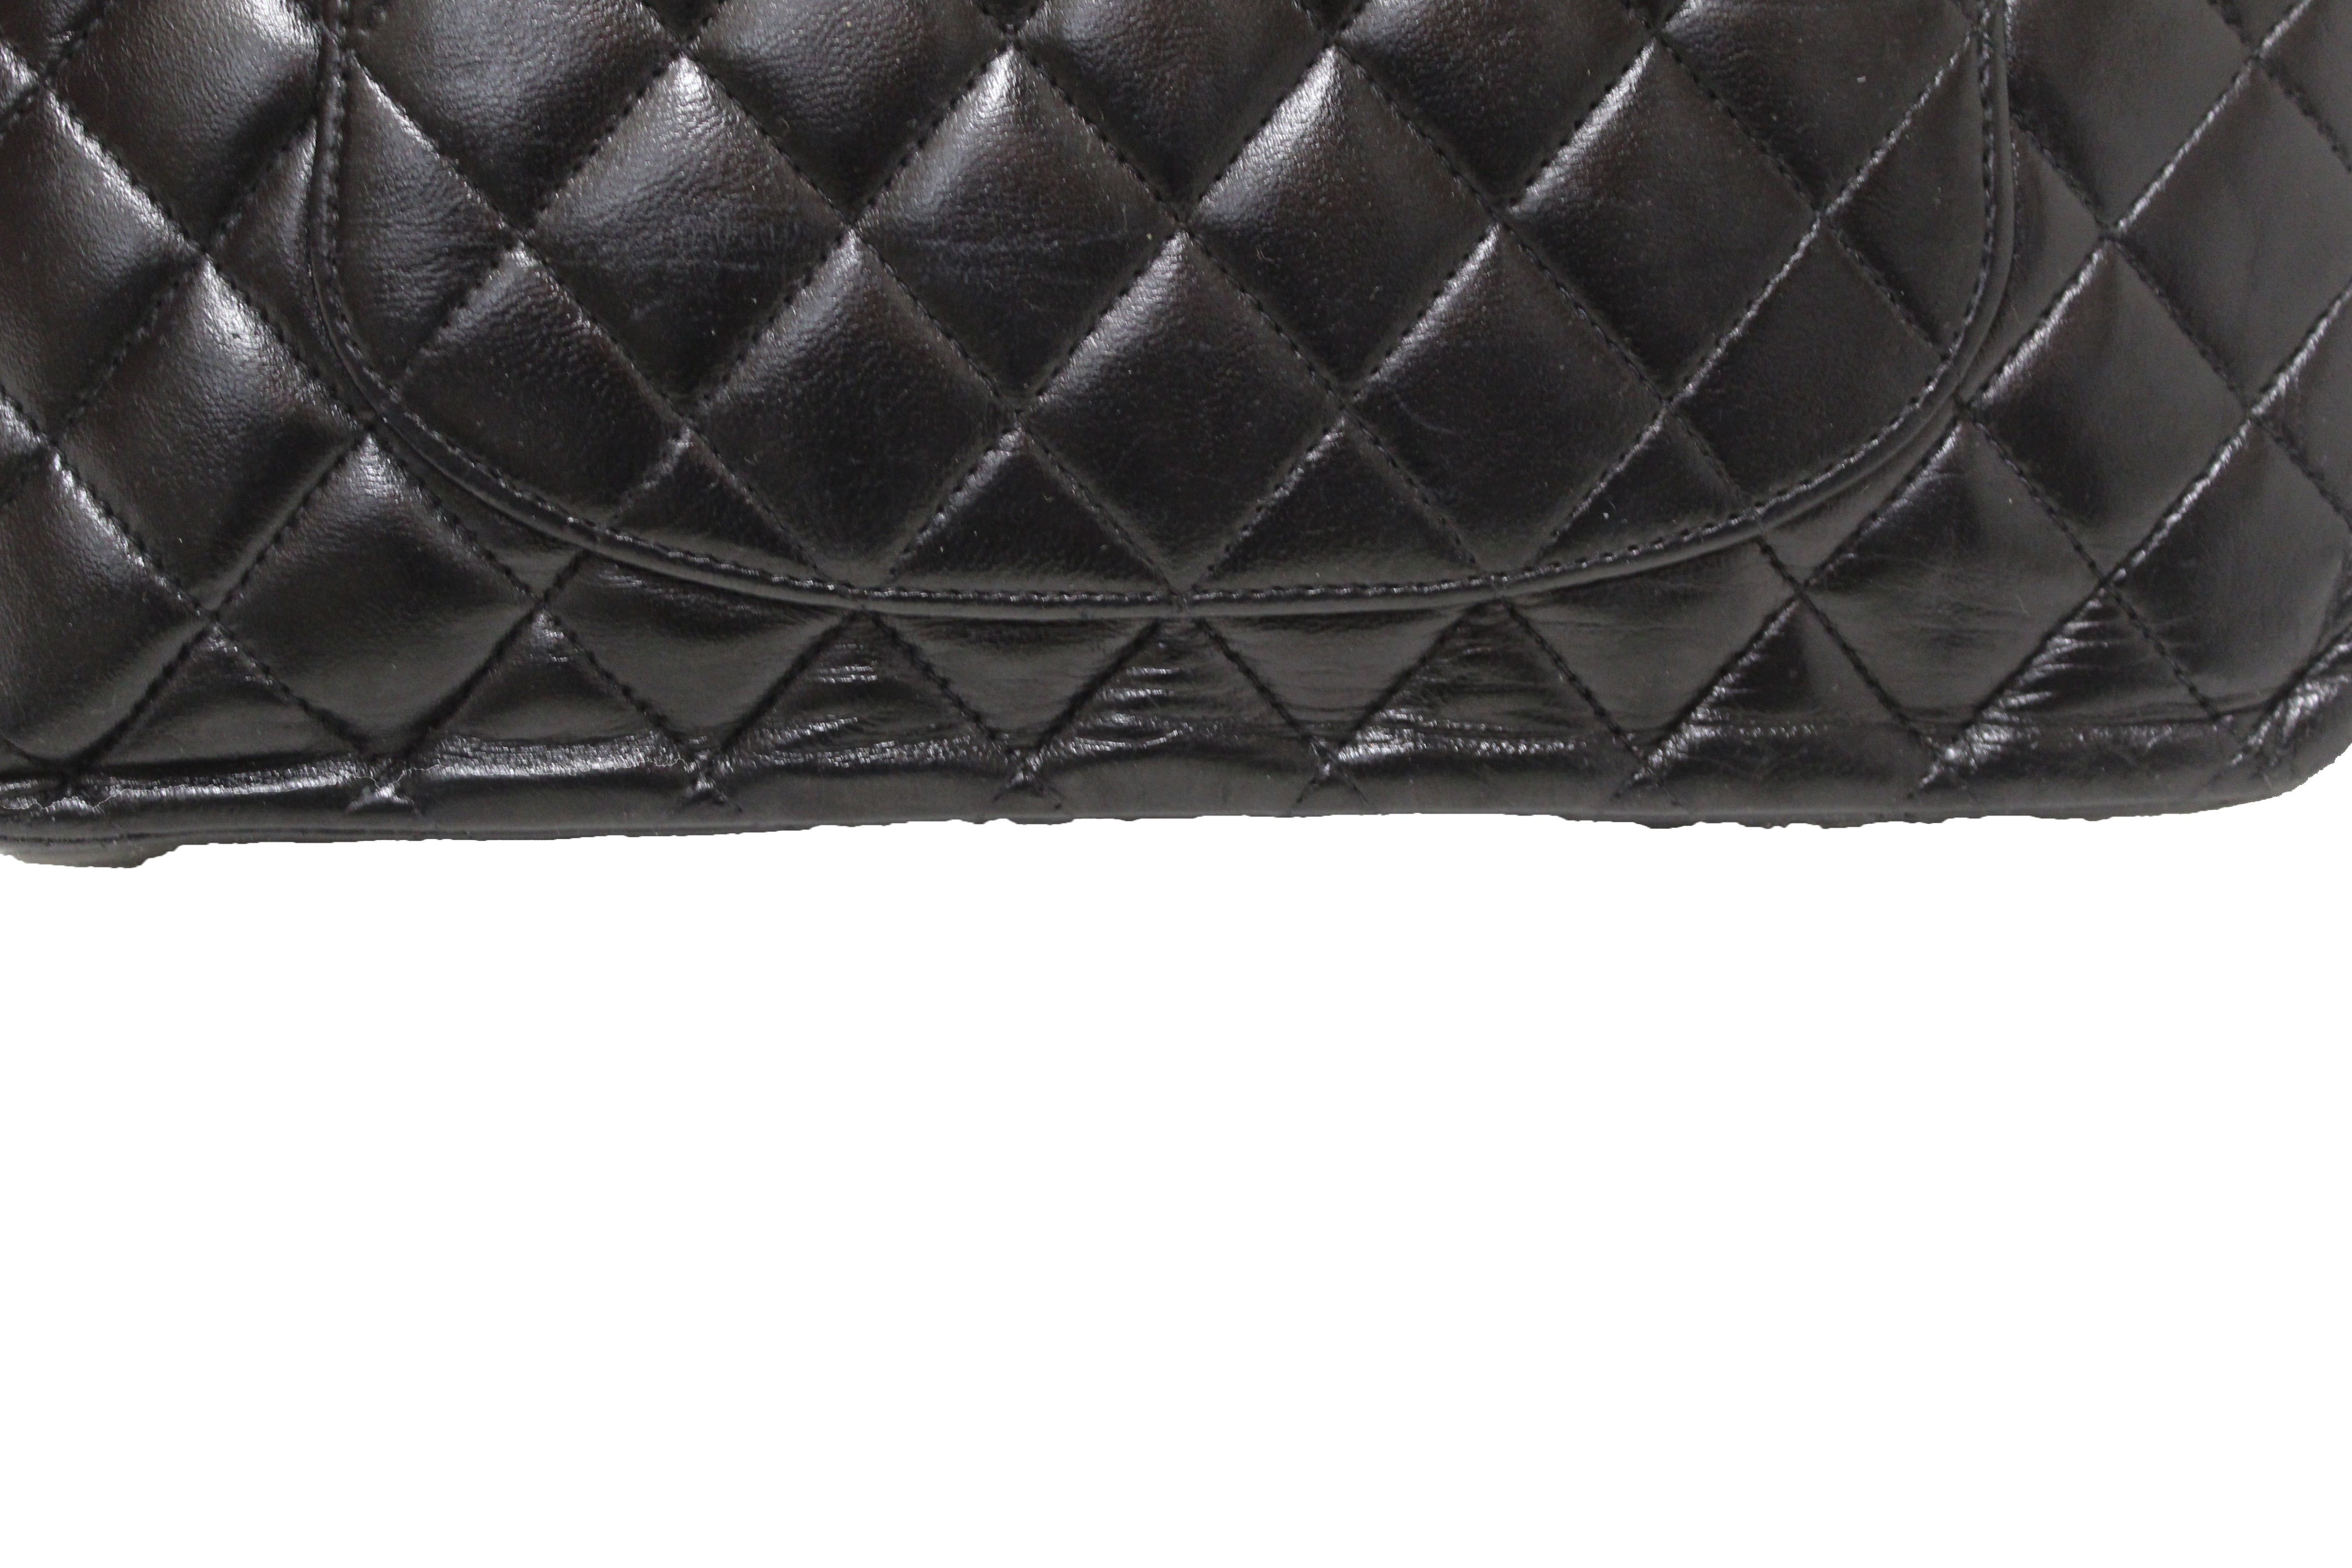 chanel quilted clutch bag